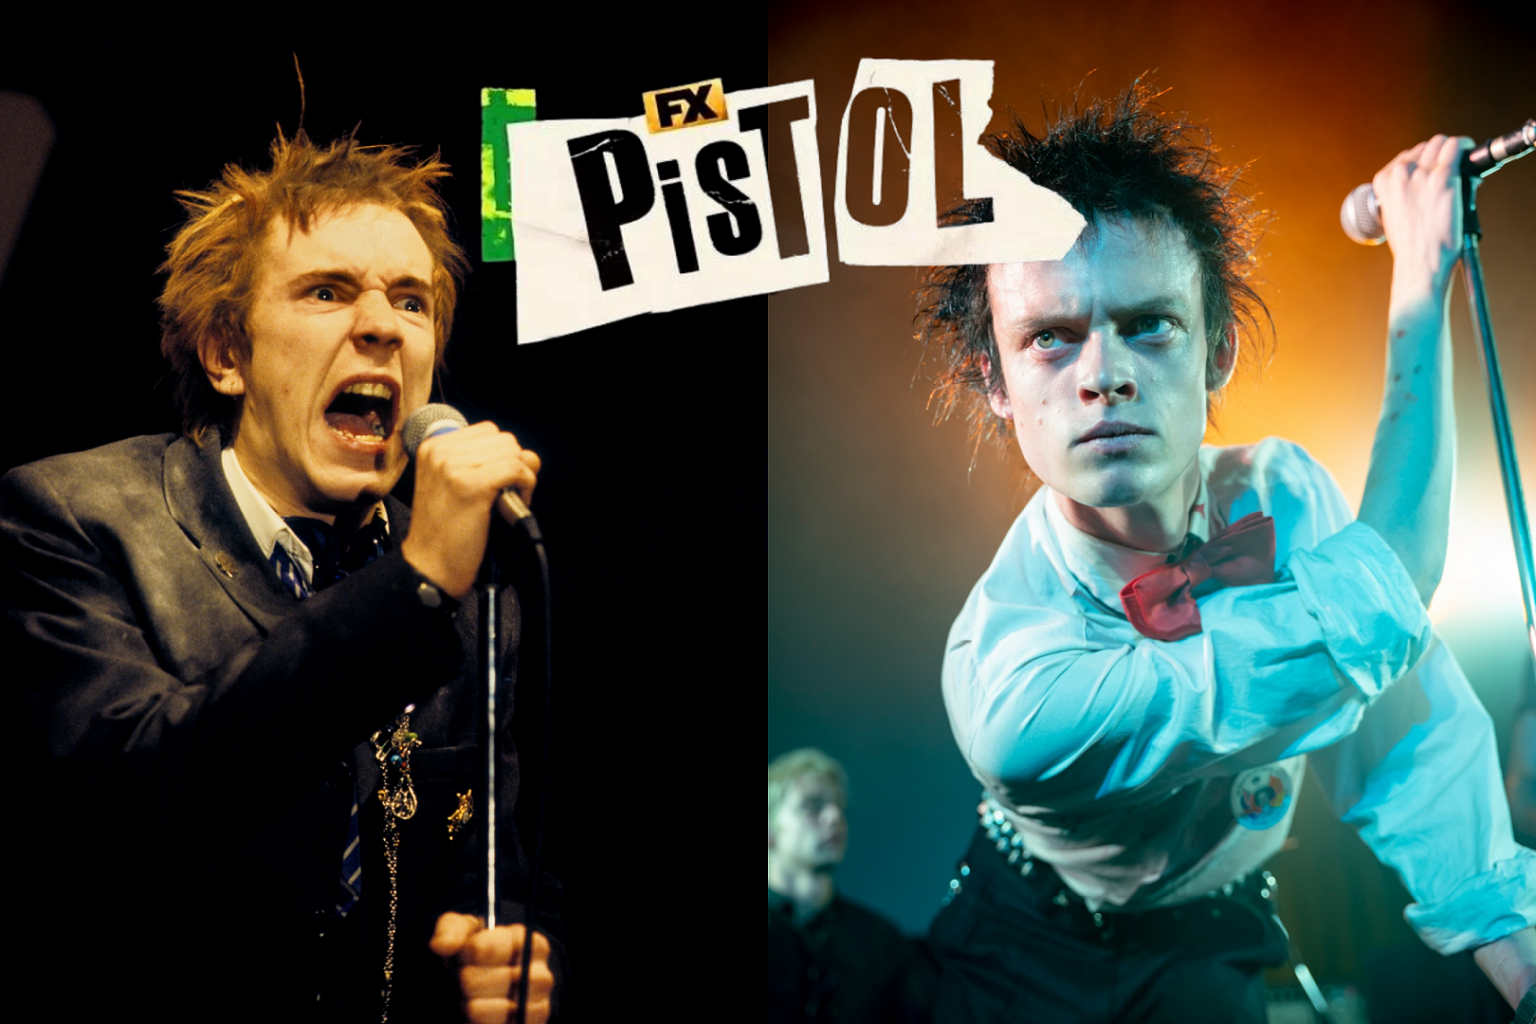 Pistol Team Want Johnny Rotten To Give The Sex Pistols Biopic A